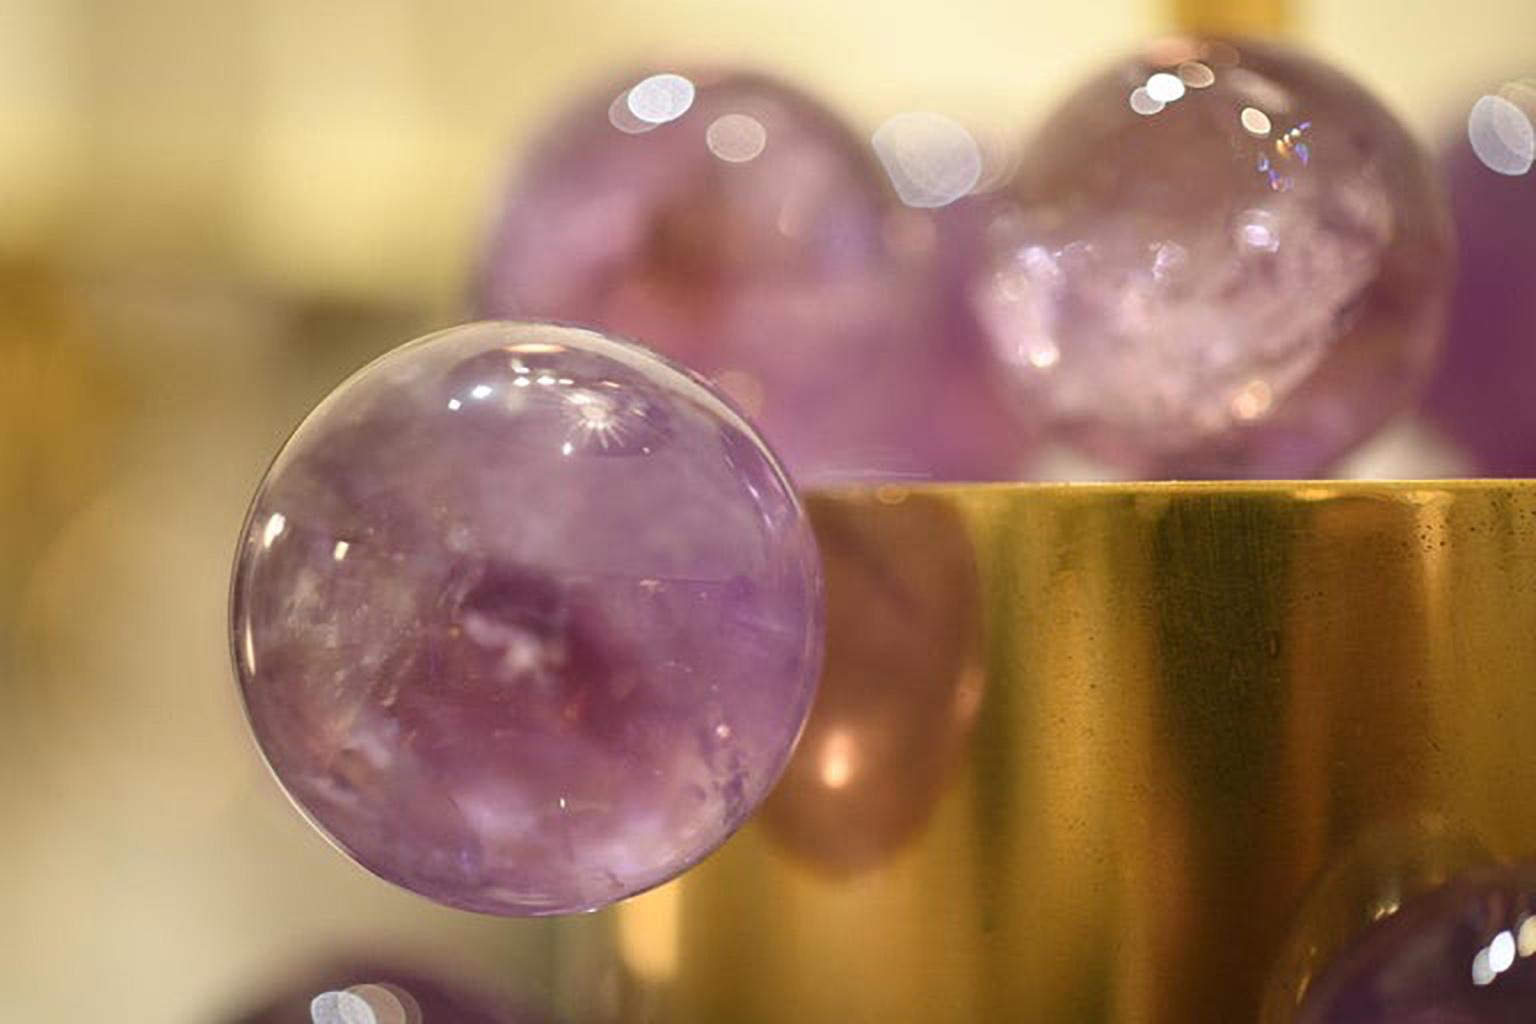 Contemporary Amethyst Bubble Lamps by Phoenix For Sale